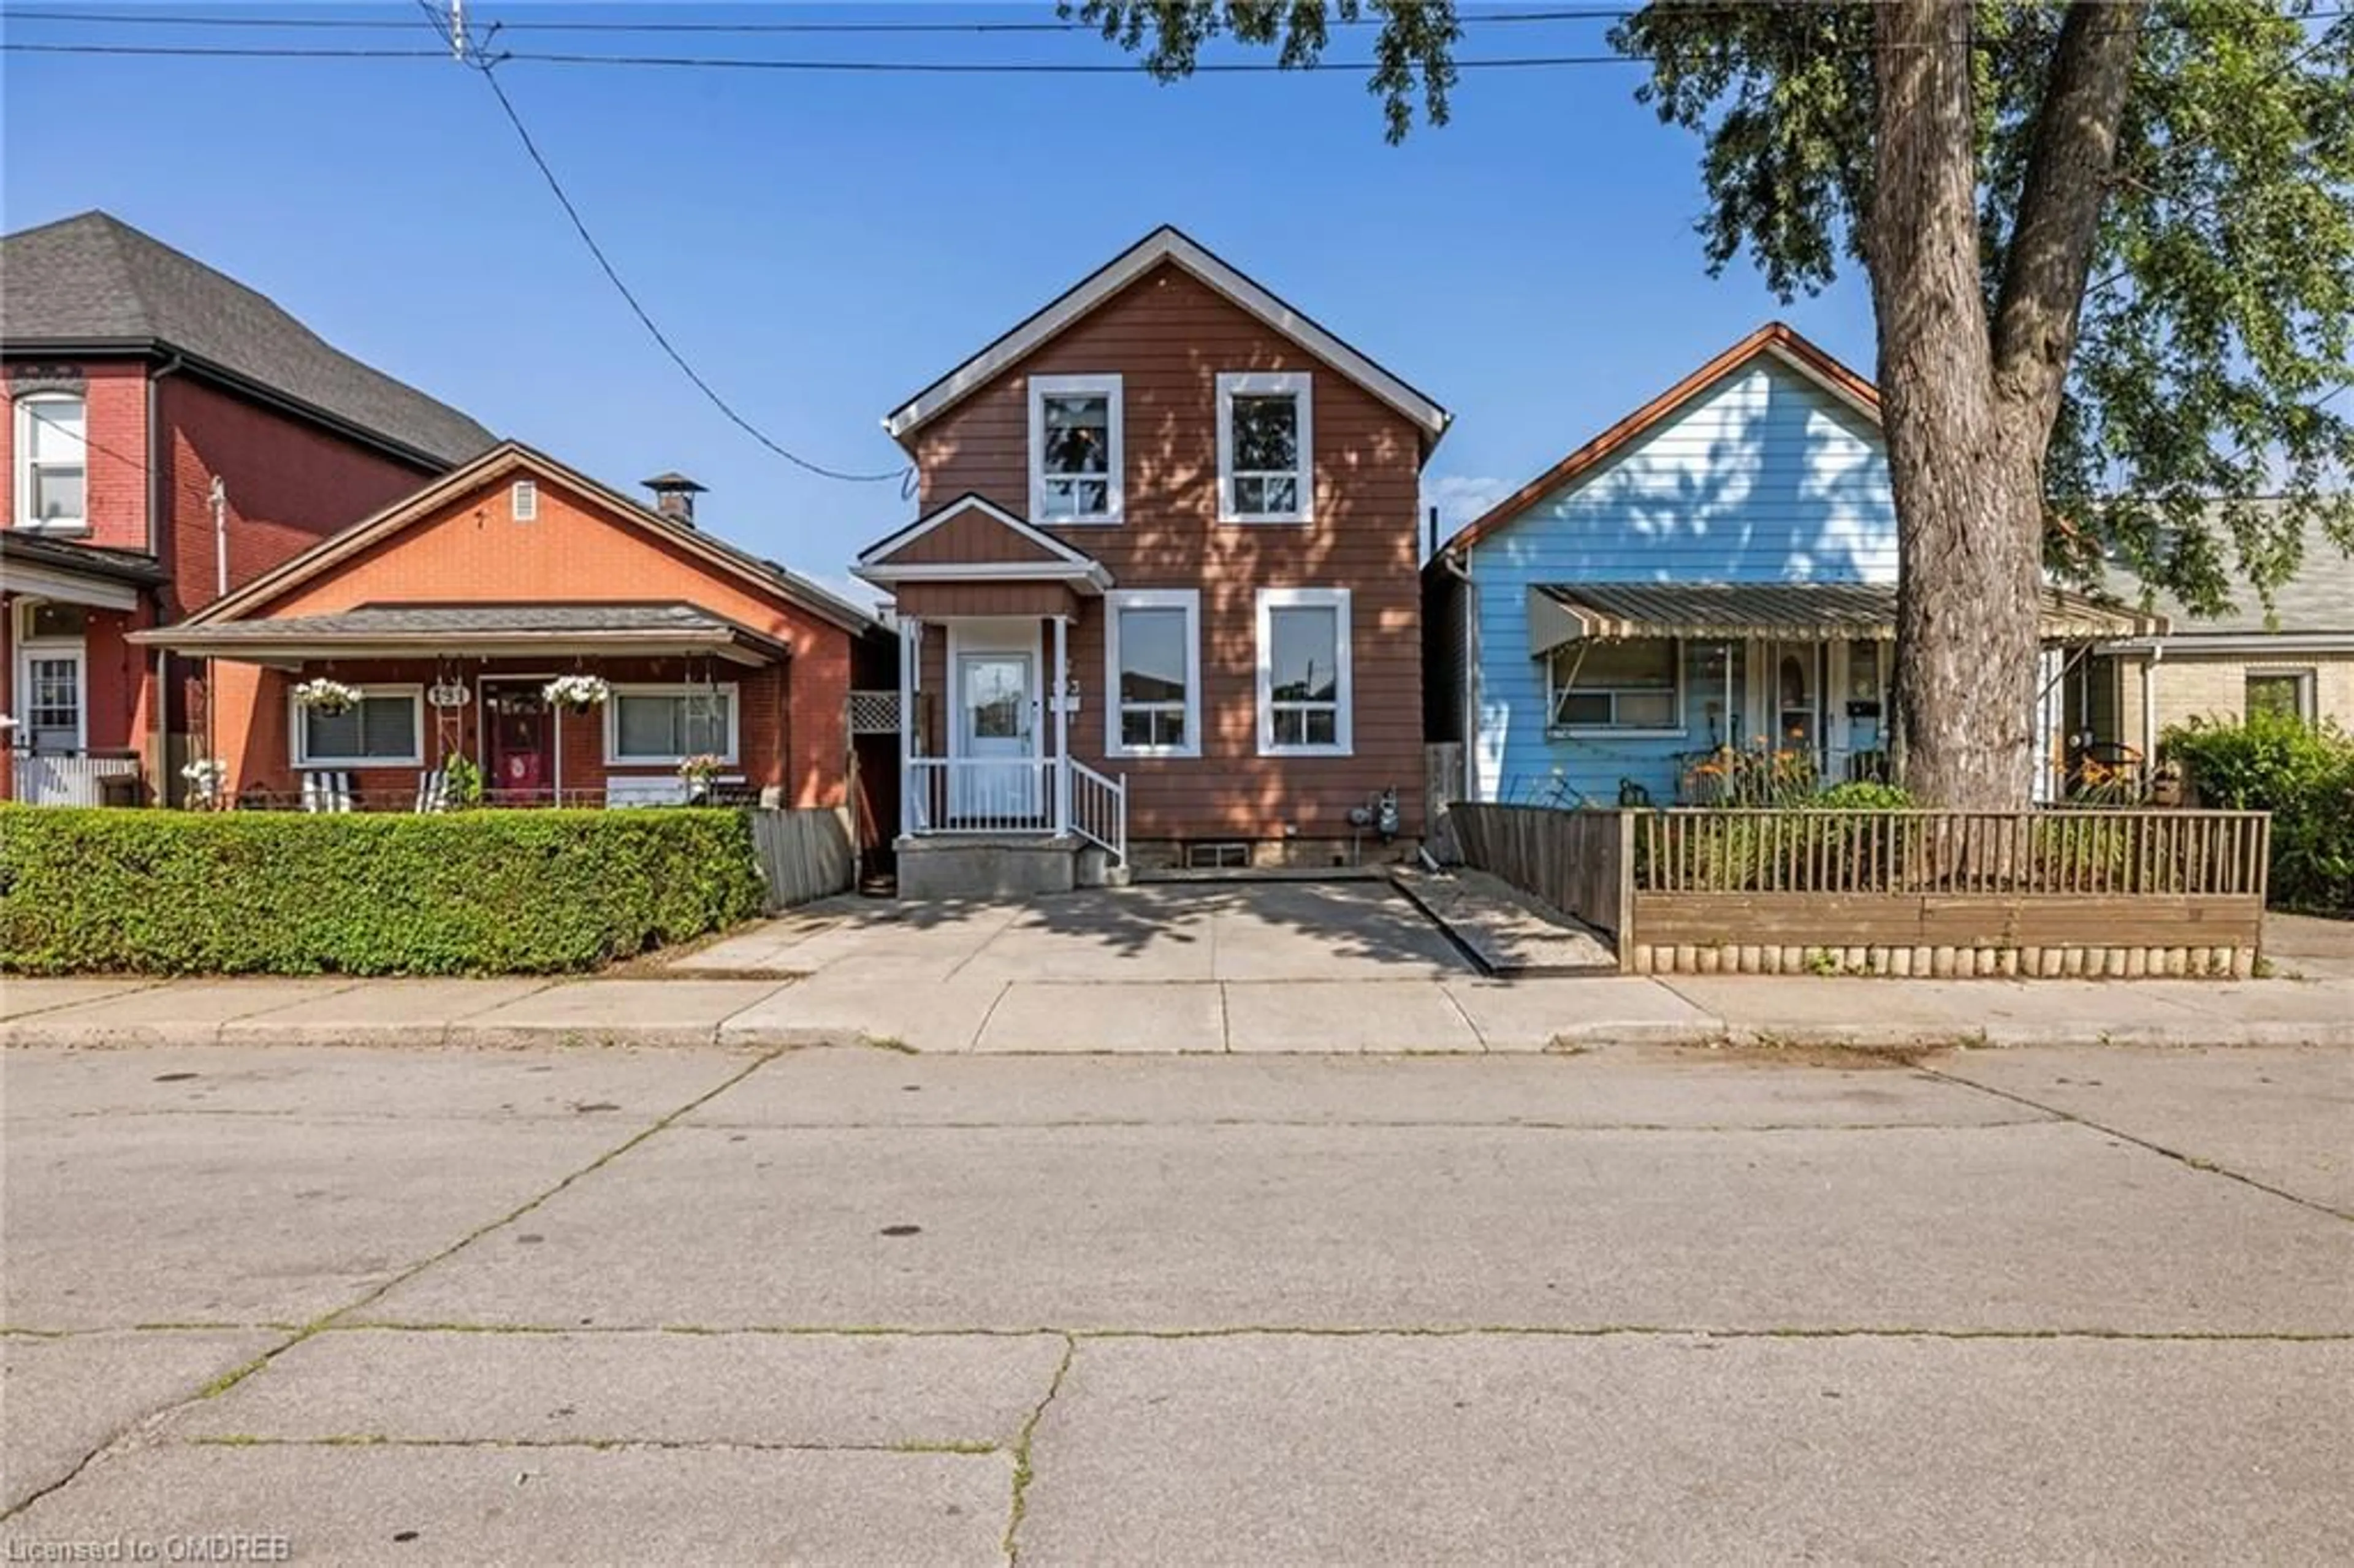 Frontside or backside of a home for 193 West Ave, Hamilton Ontario L8L 5C7